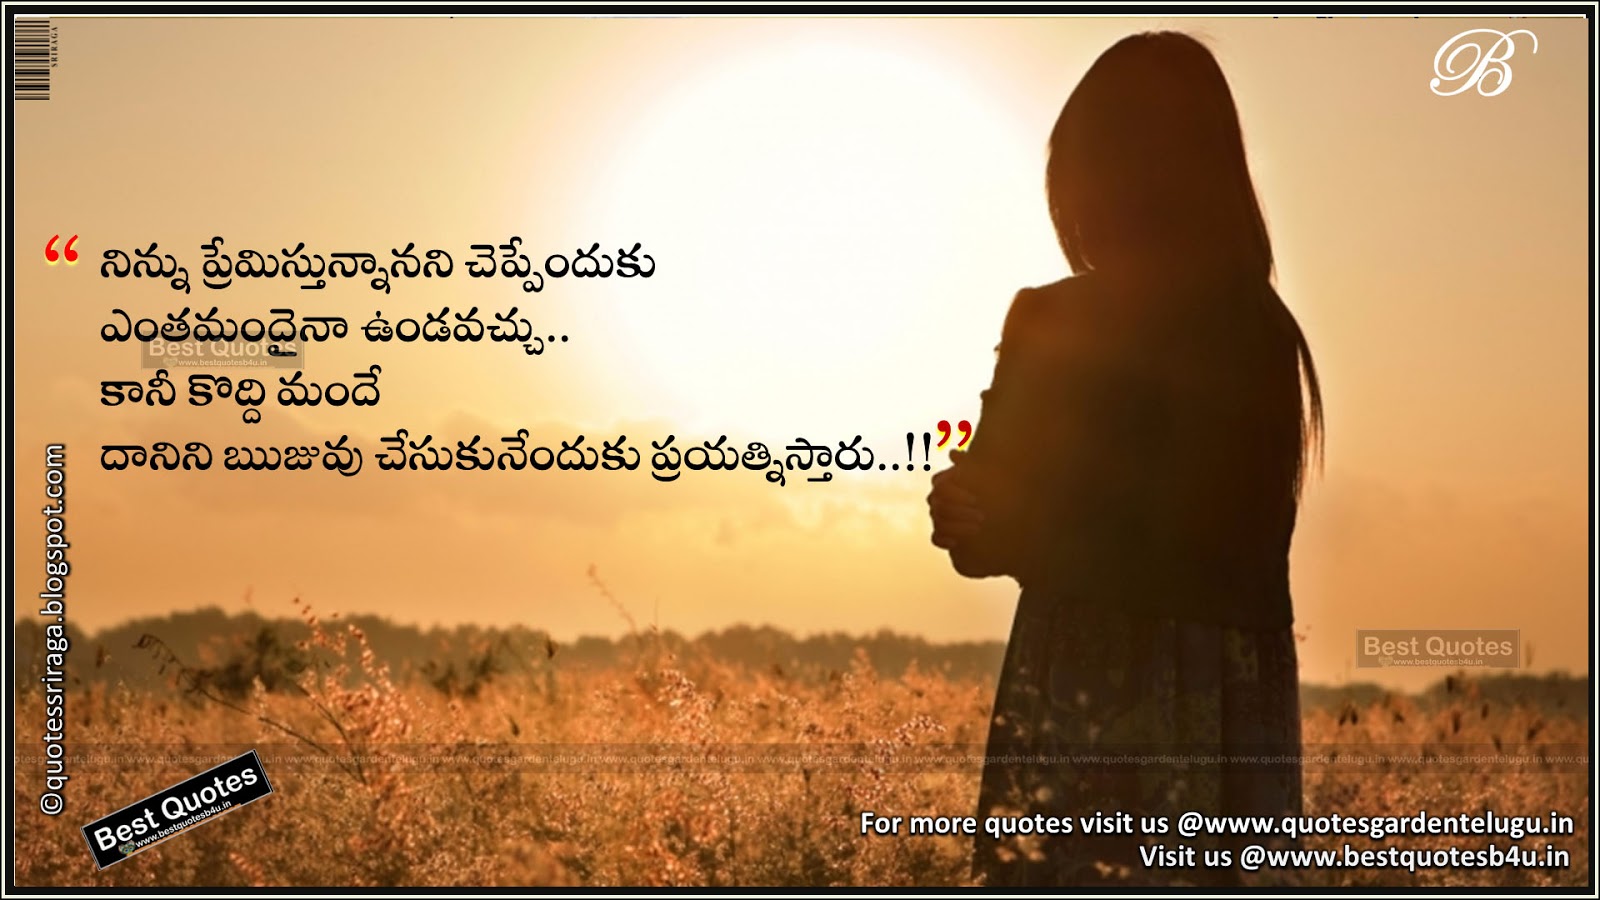 Download Best Heart Touching Wallpapers With Quotes - Telugu Heart Touching - HD Wallpaper 